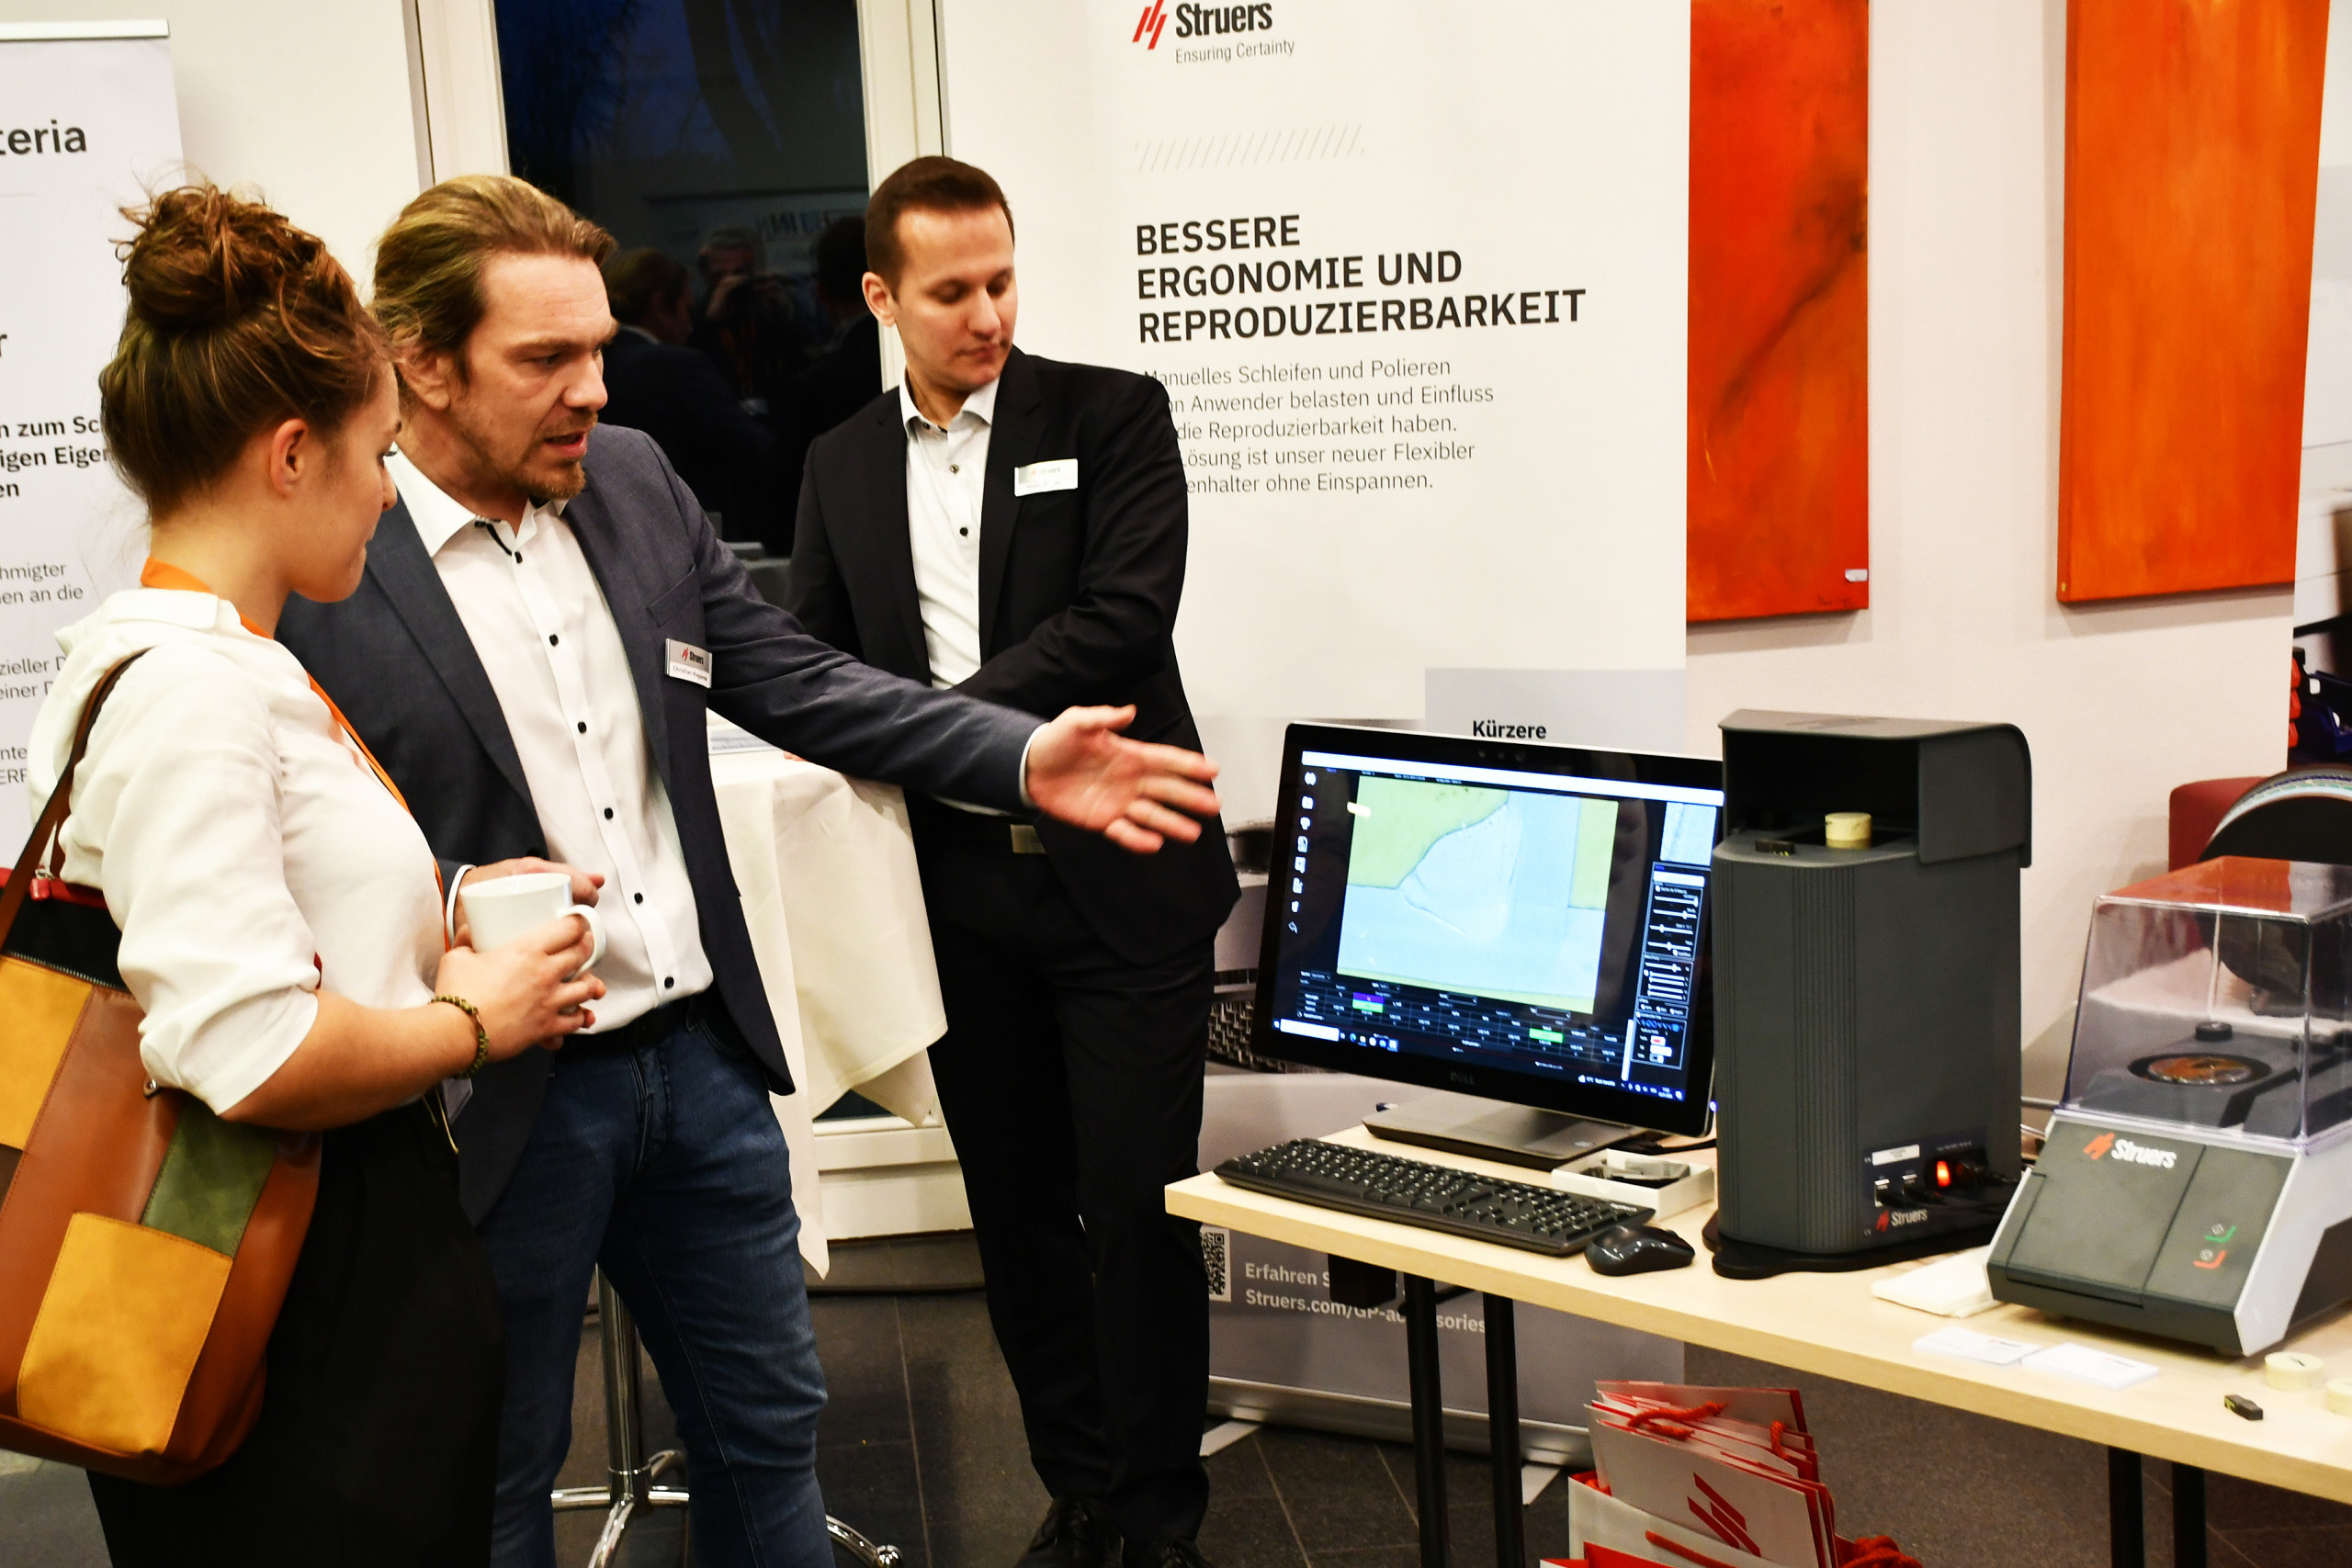 Struers GmbH, supplier of equipment for metallographic laboratory analysis and quality control, was also represented at the trade exhibition. Landshut University of Applied Sciences